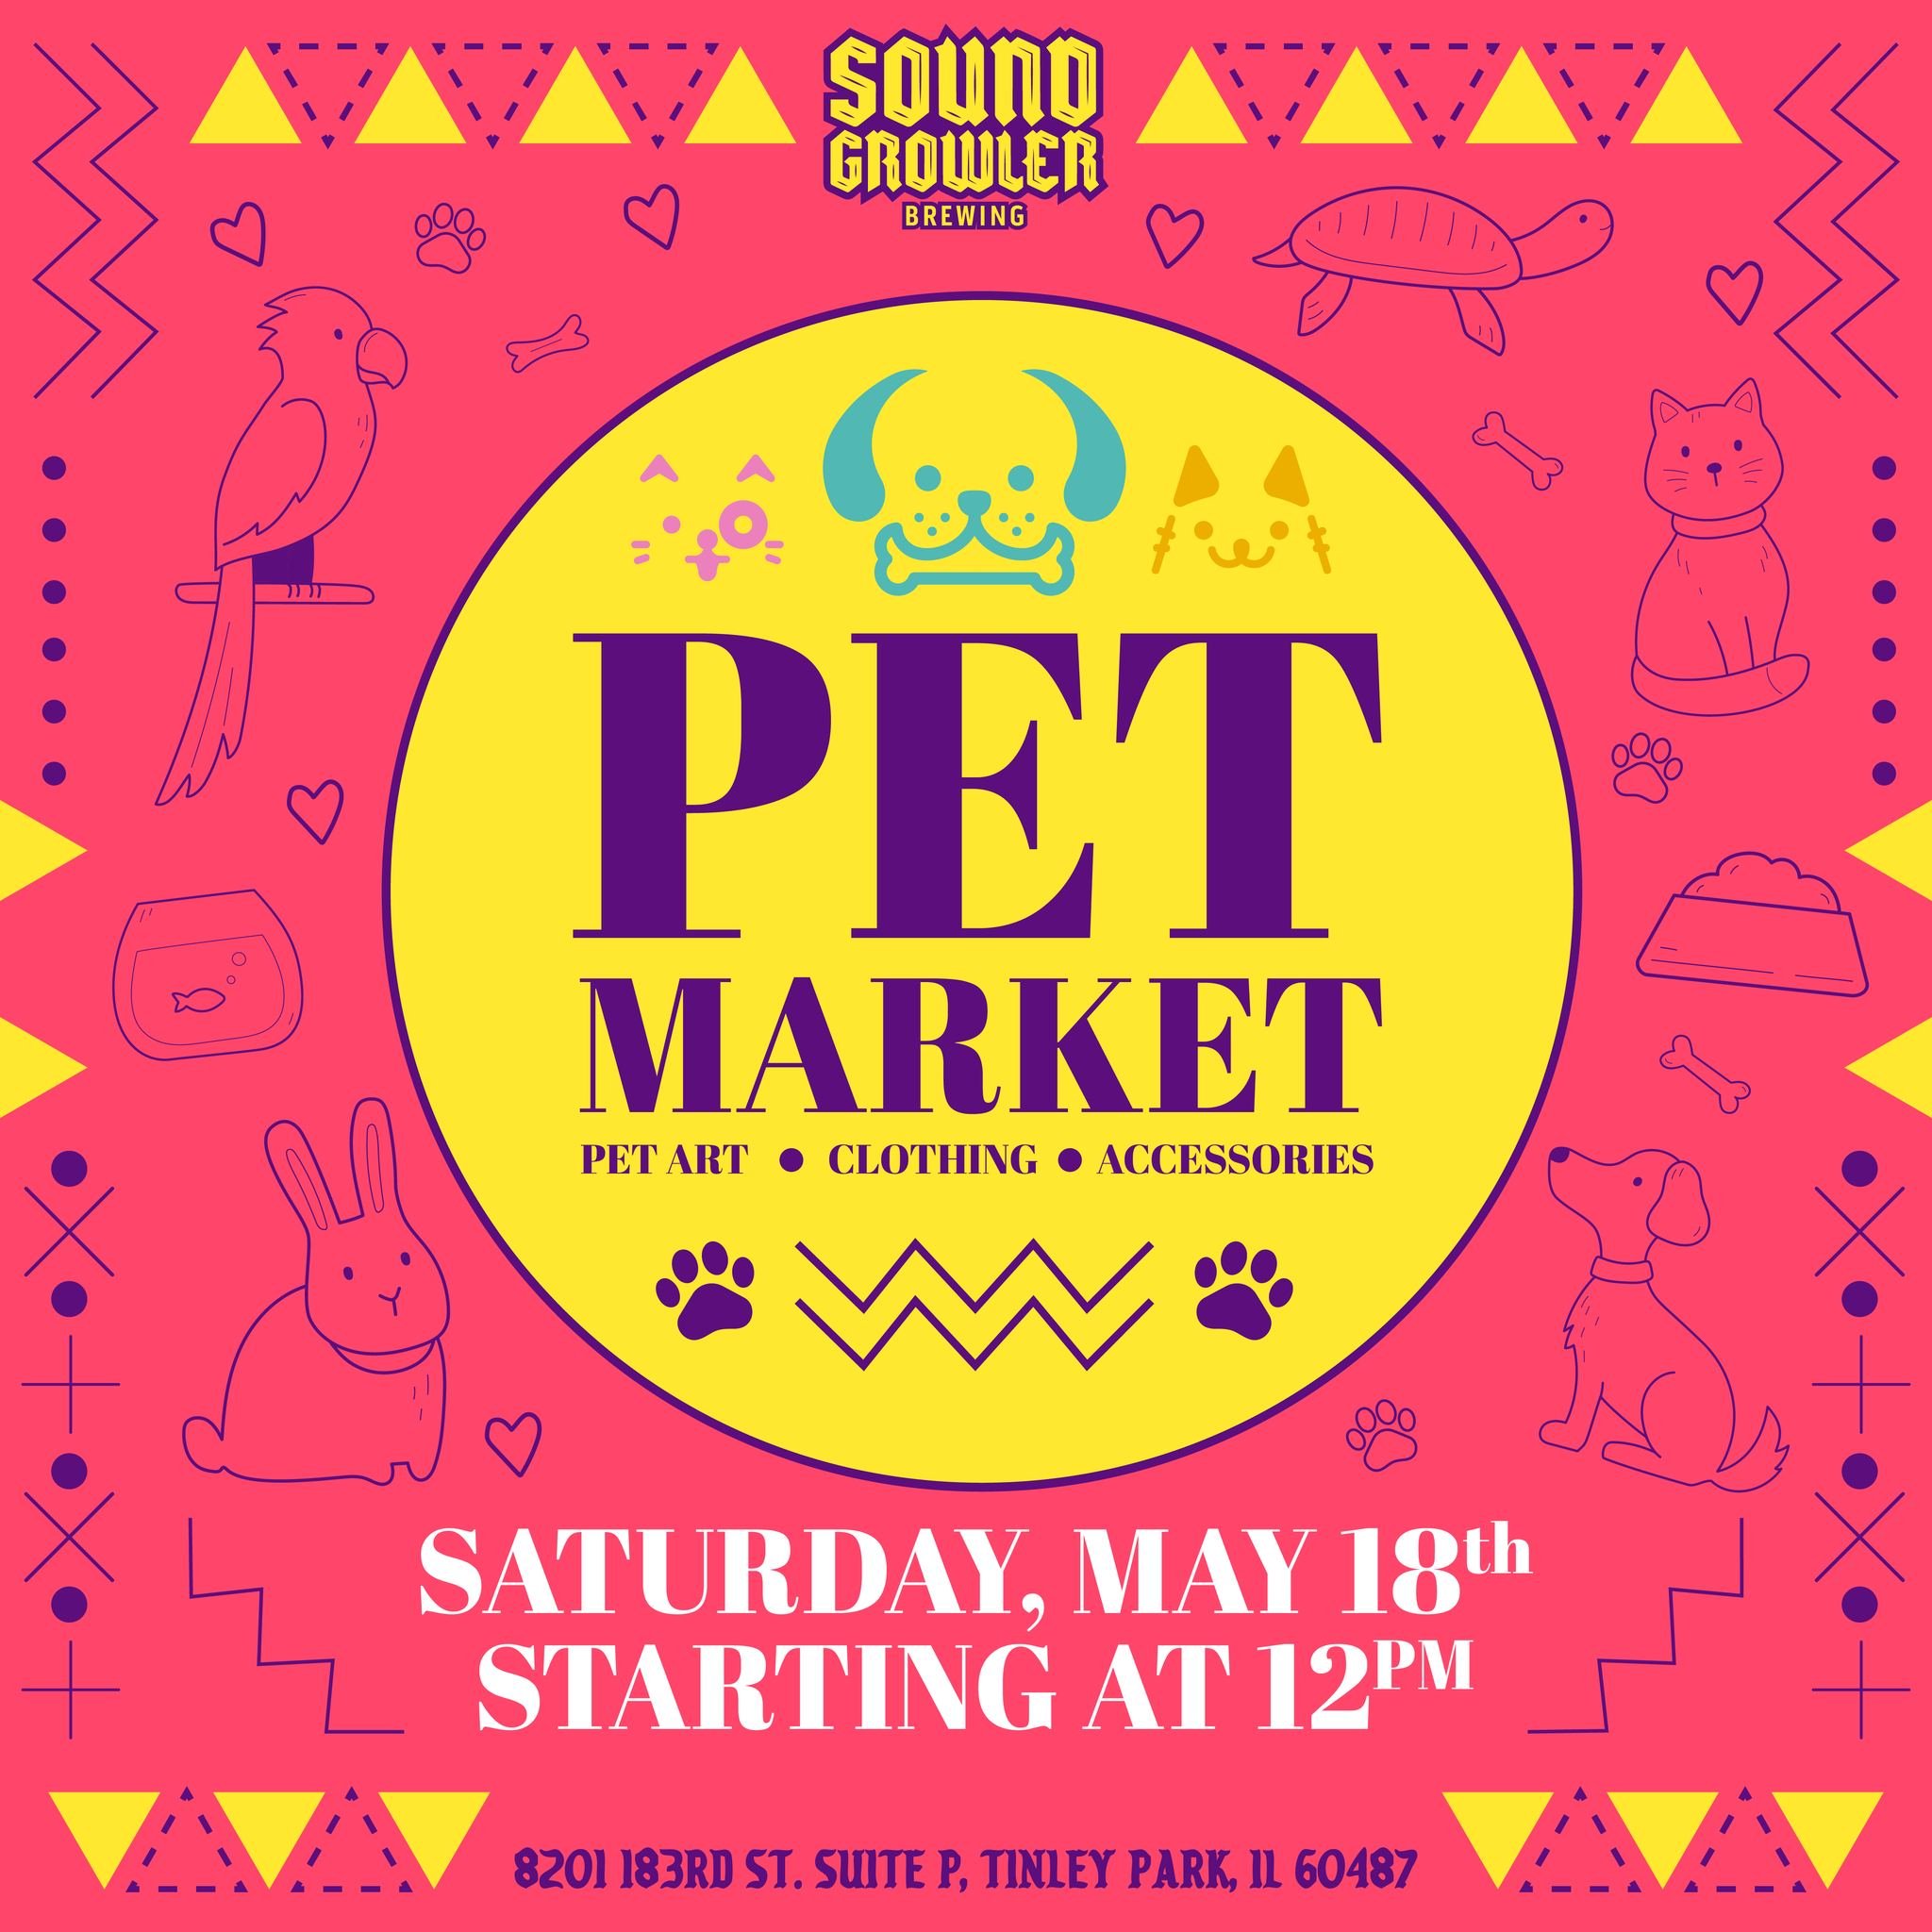 Exciting News! Our Pet Market is back! 🐾
Mark your calendars for Saturday, May 18th from 12PM-5PM! It's going to be an awesome day filled with everything you and your furry friends could ever dream of! 🐶🐱
Join us for an exclusive showcase of pet a